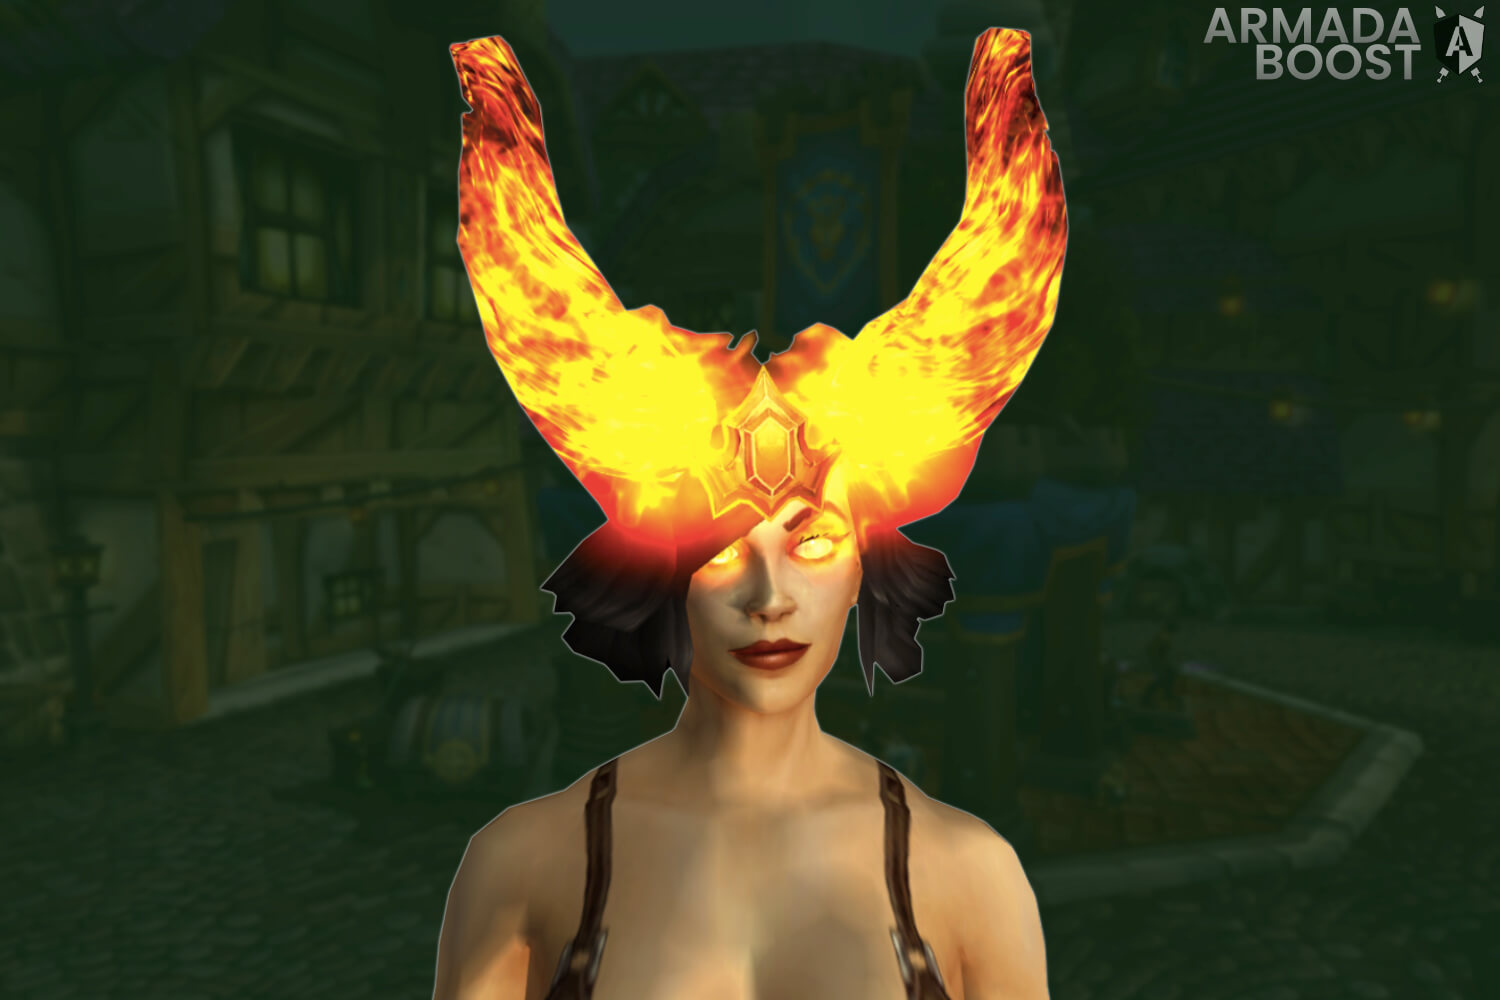 jewel of the firelord trading post may wow armadaboost